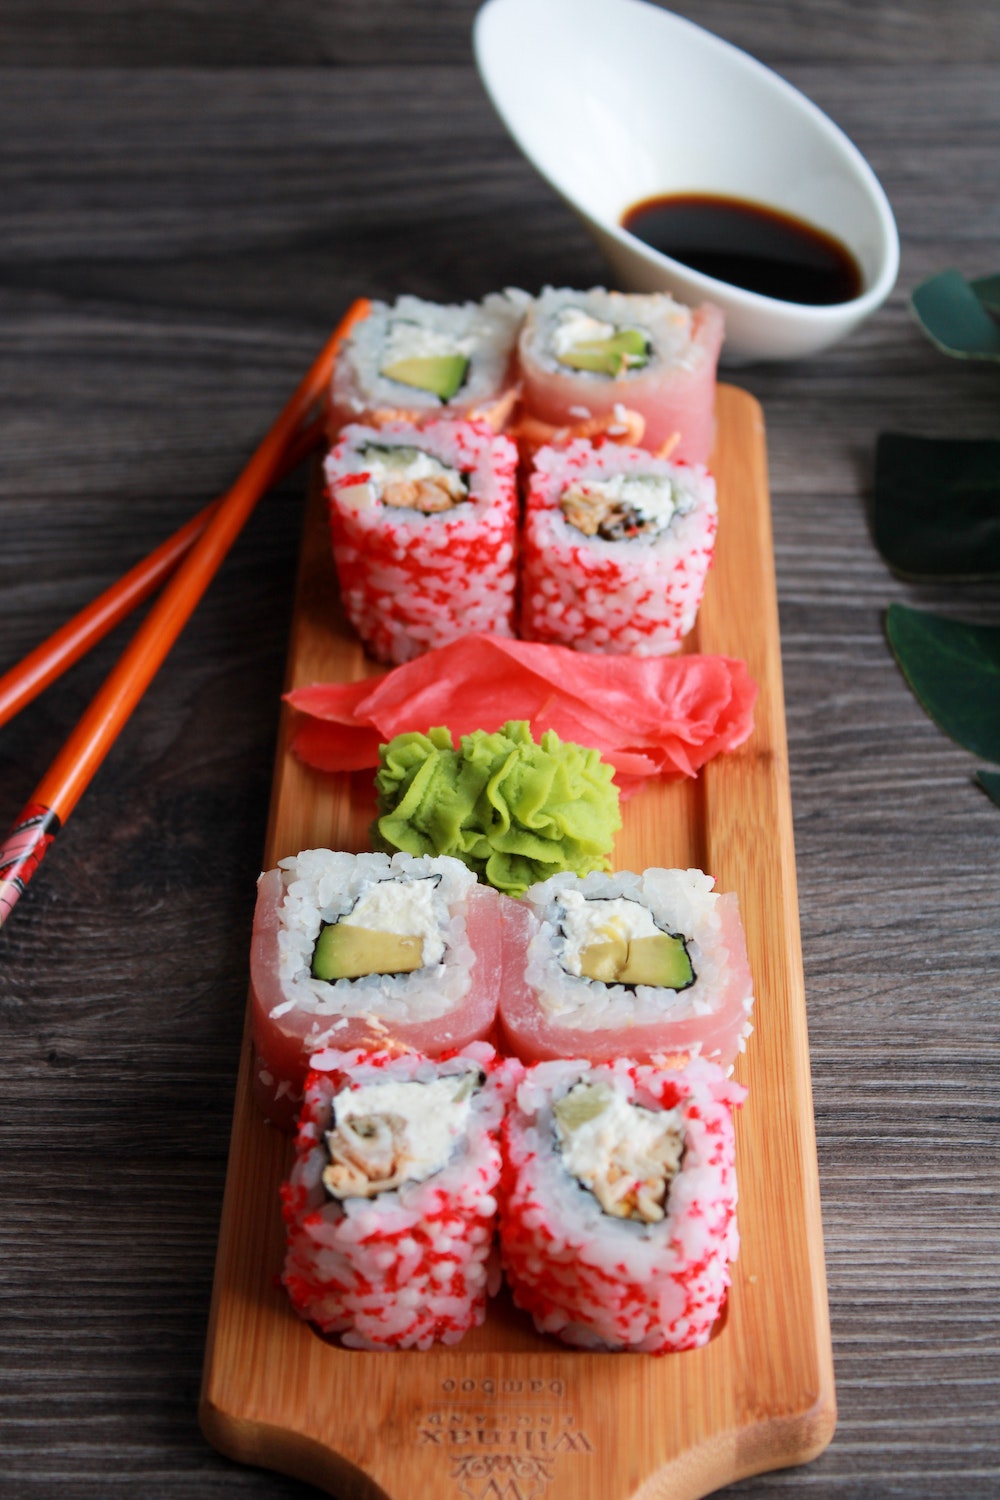 wasabi paste and ginger slices surrounded by sushi on a wooden platter, next to a pair of red chopsticks and a small bowl of soy sauce